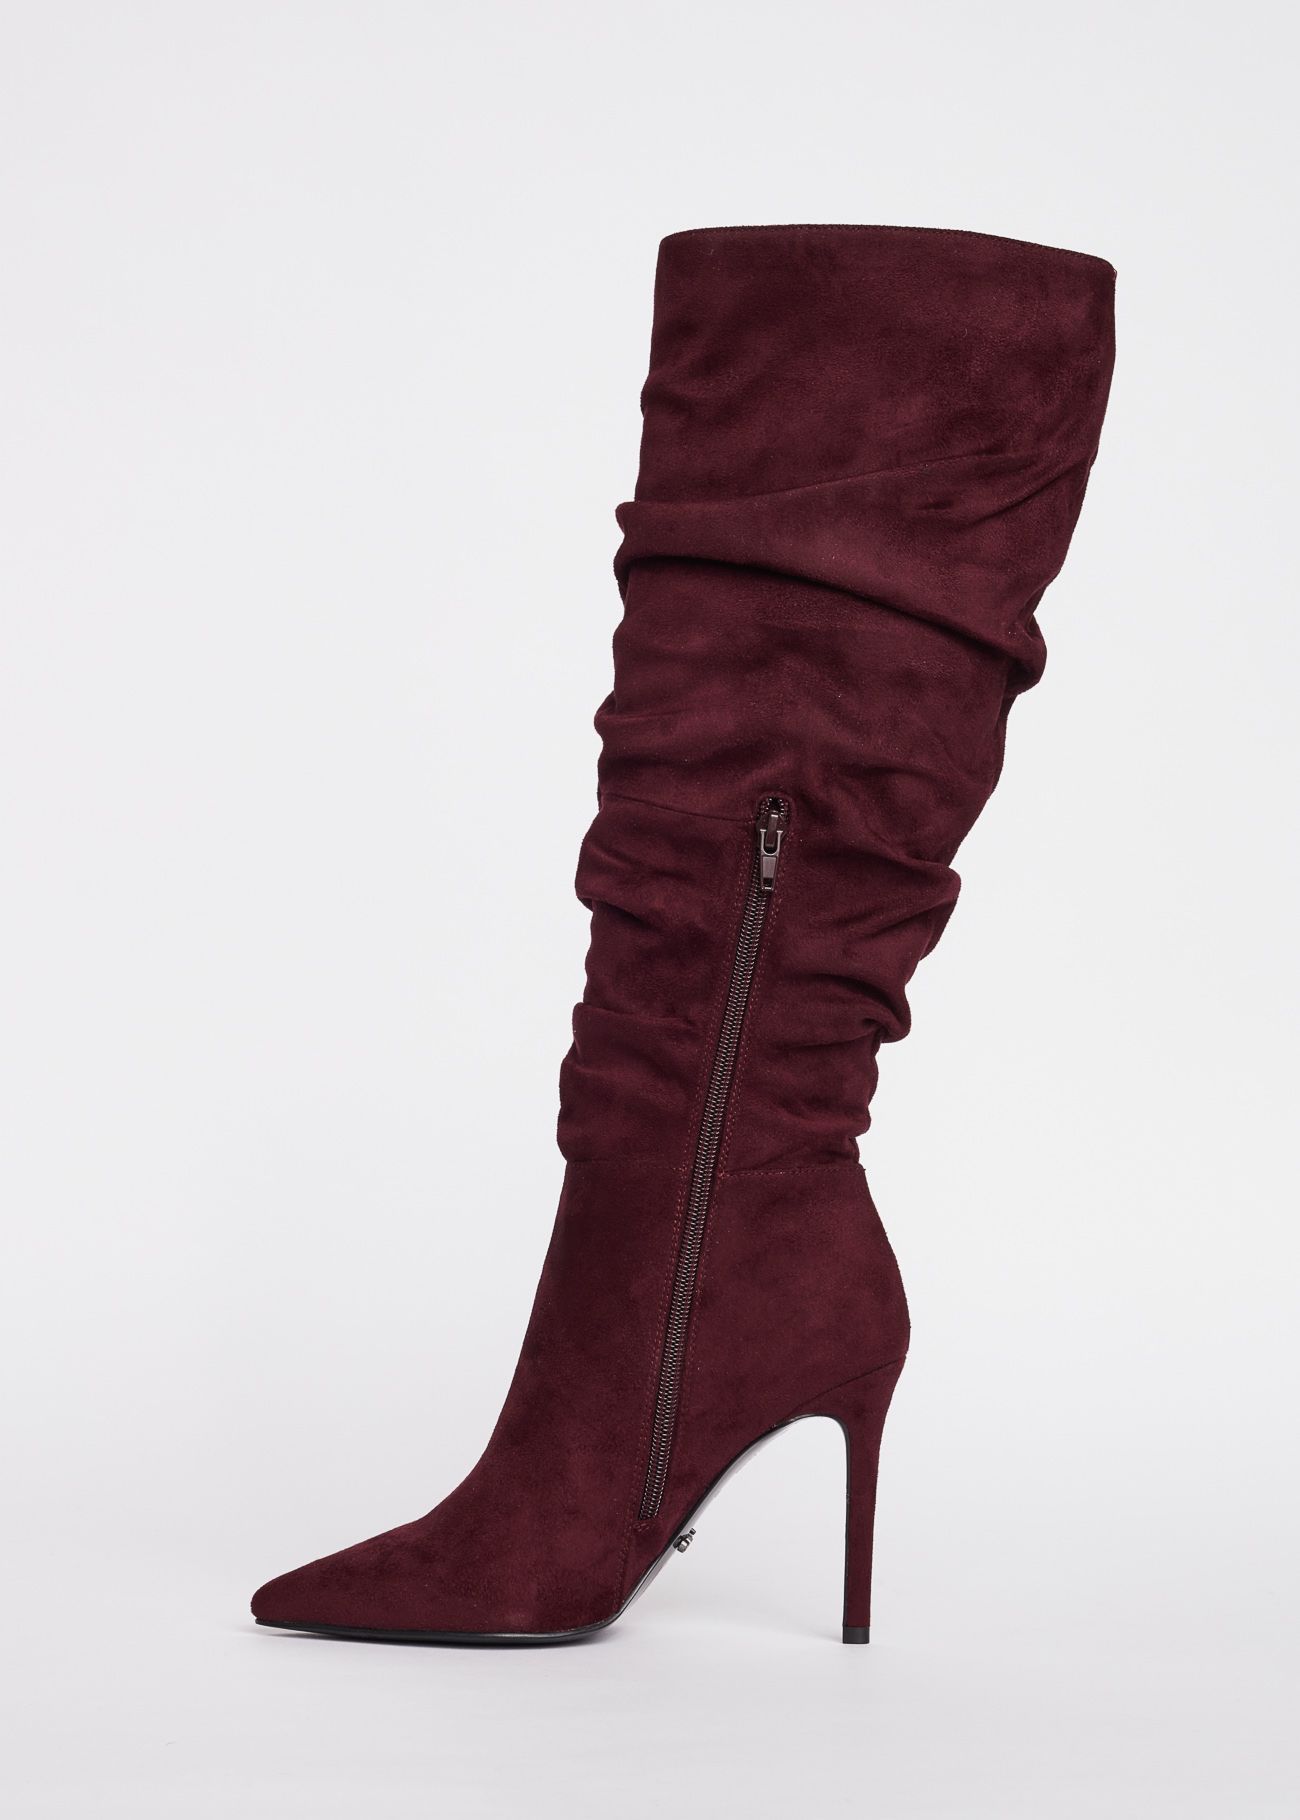 Iris ankle boots